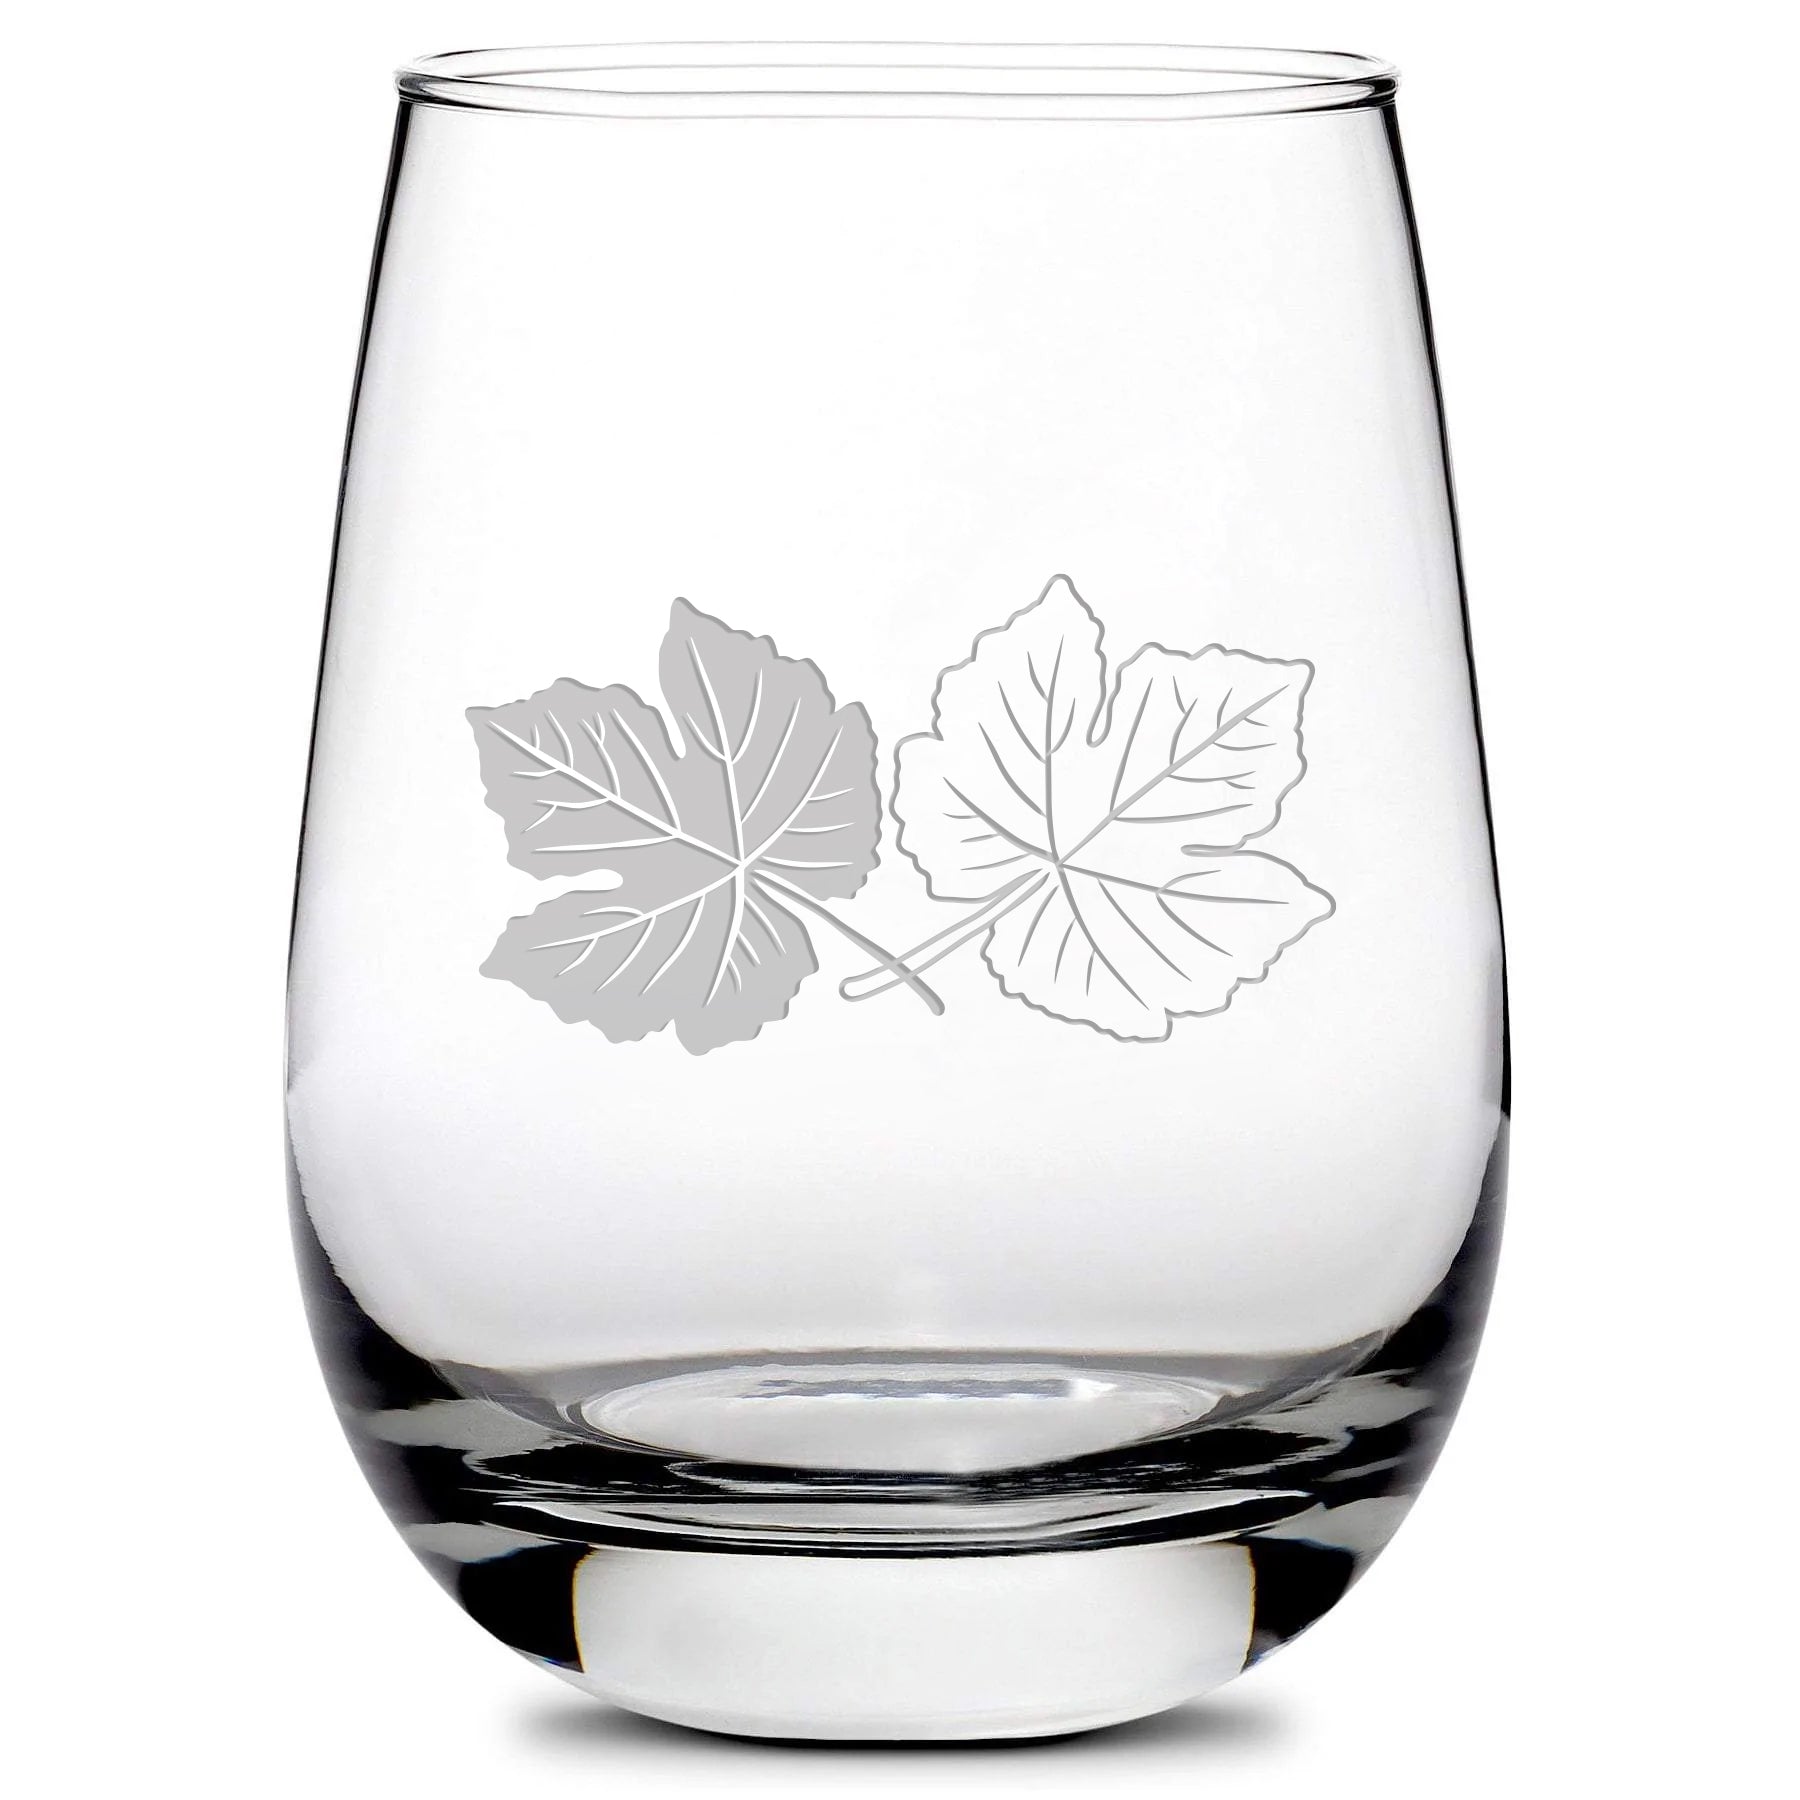 Premium Stemless Wine Glass, Couple of Grape Leaves, Laser Etched or Hand Etched, Made in USA, 16oz